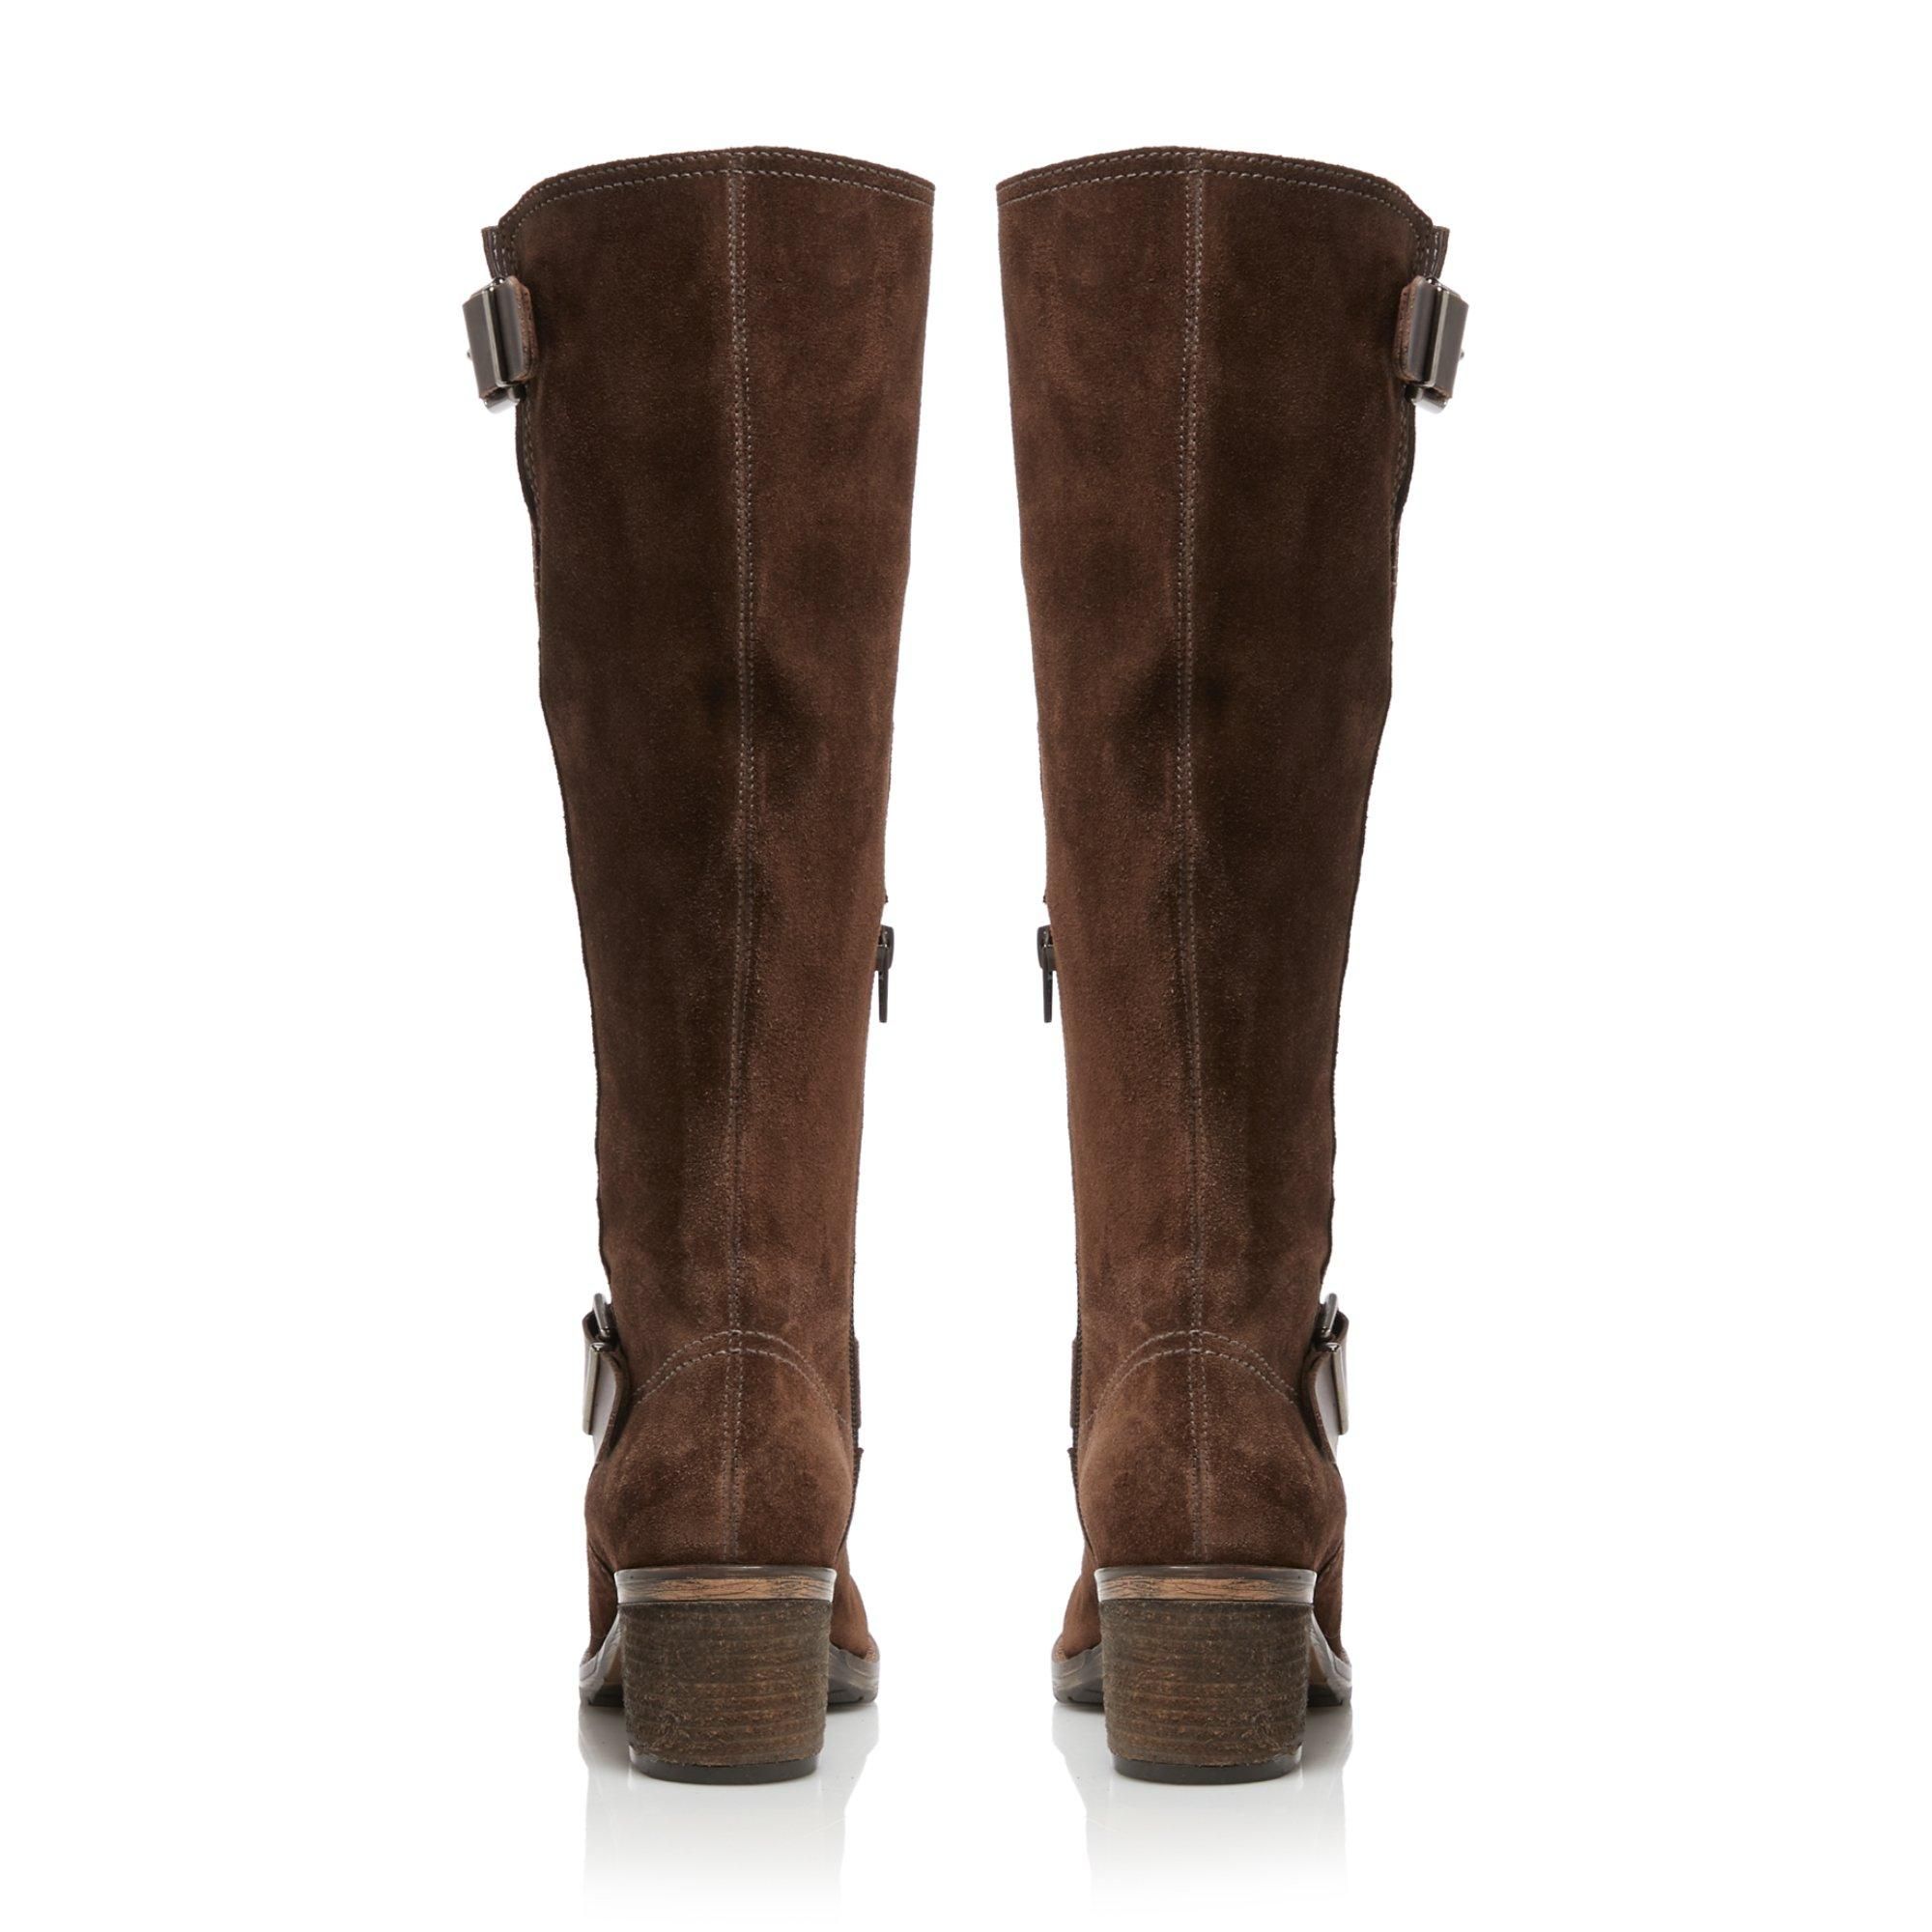 Dune London takes cues from the wild west for its Twiggie knee-high boots. Featuring double buckle details and classic contrast wingtip stitching. They're set on a mid-block heel and secure with a neat side zip fastening.